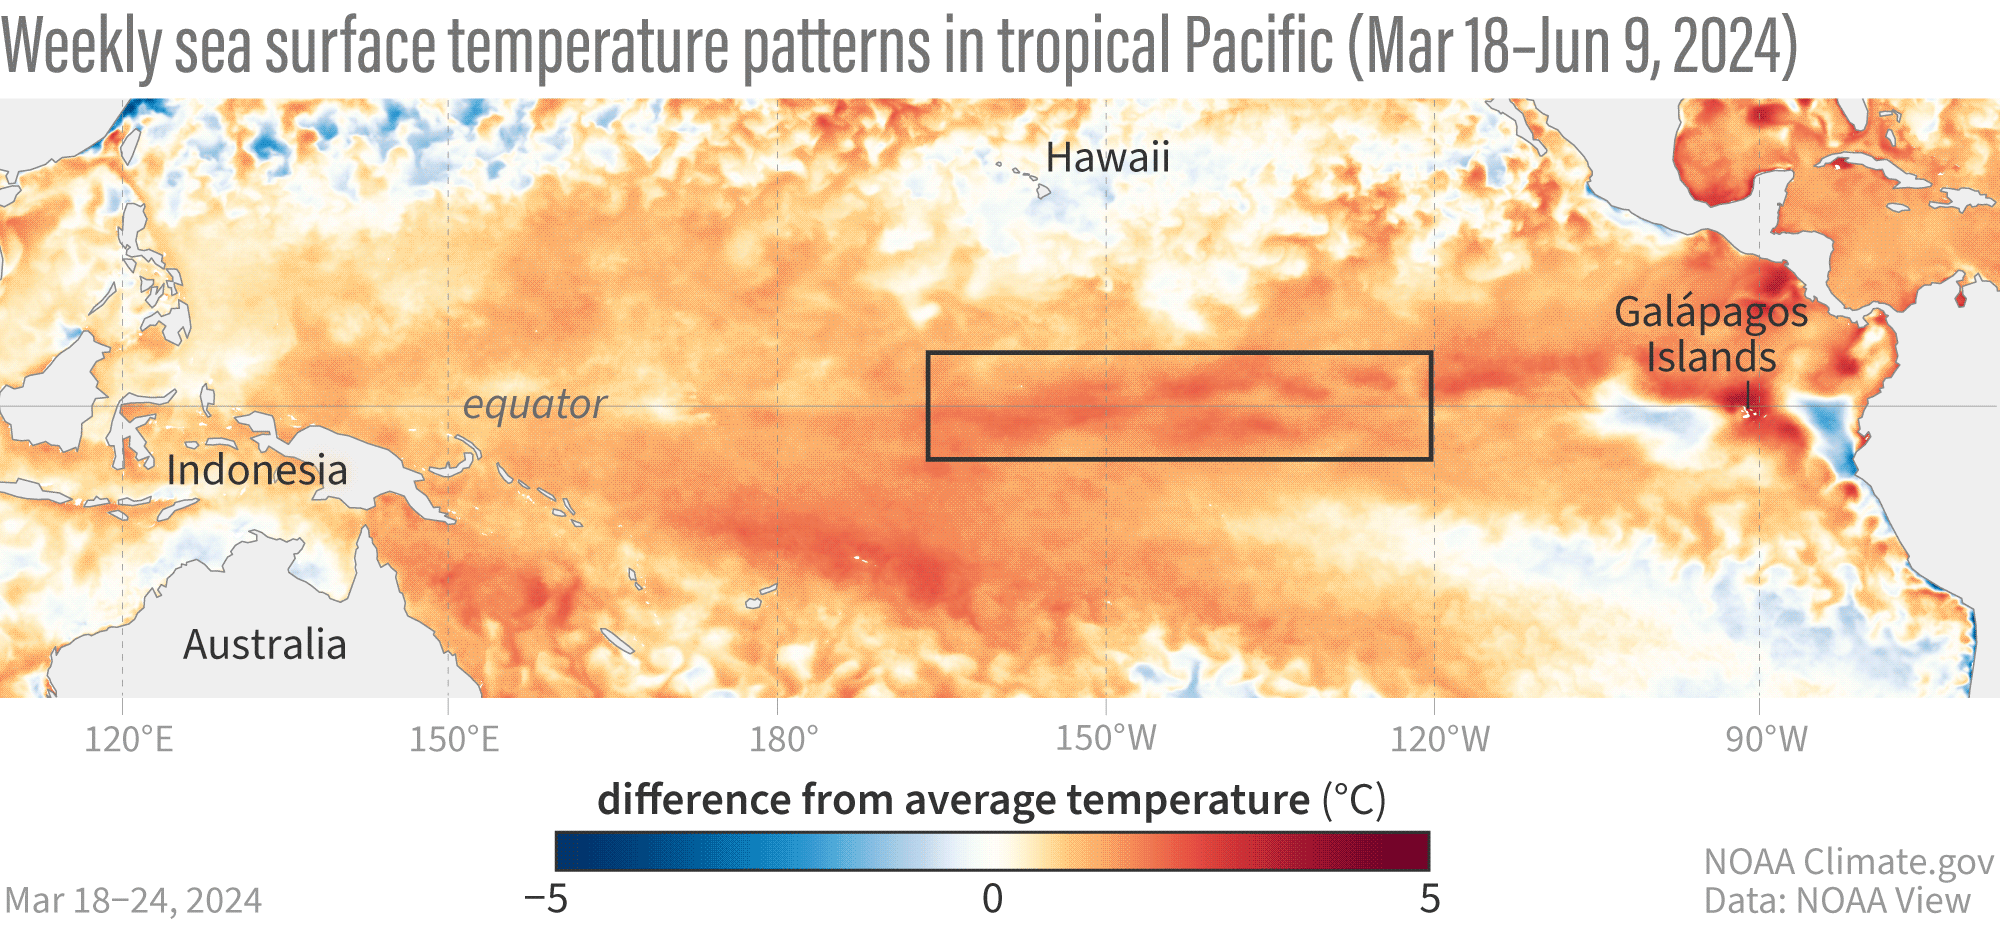 Animated maps showing weekly changes in sea surface temperatures in the tropical Pacific Ocean 